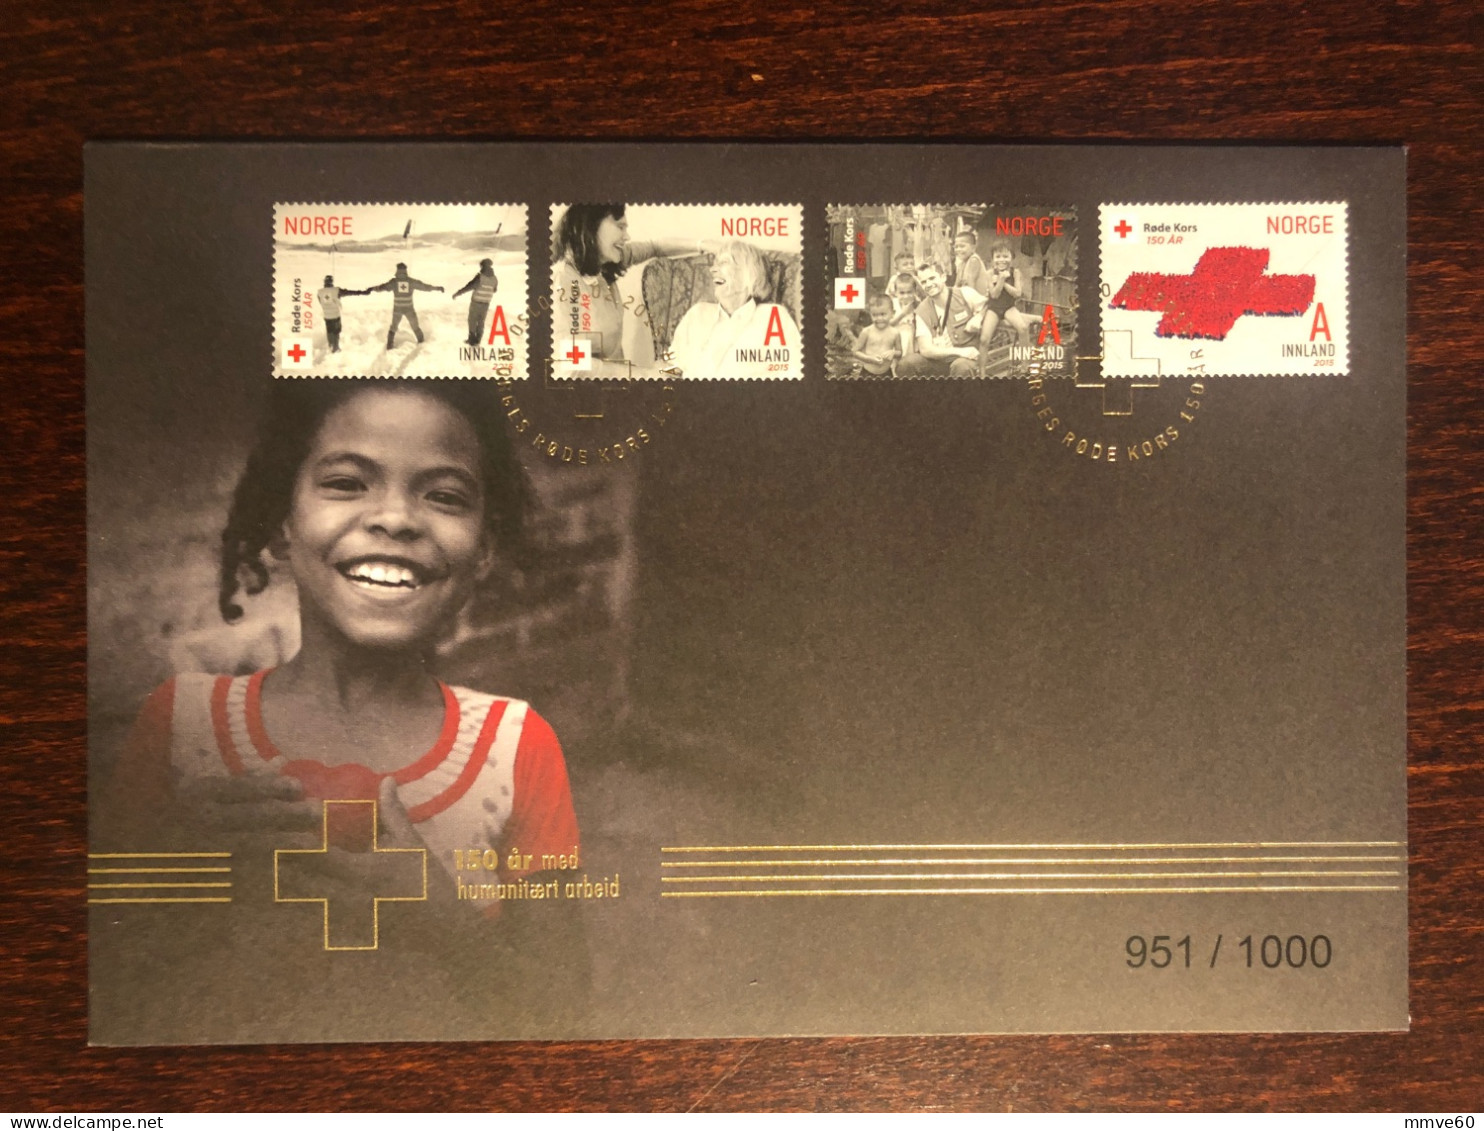 NORWAY FDC COVER 2015 YEAR RED CROSS HEALTH MEDICINE STAMPS - FDC